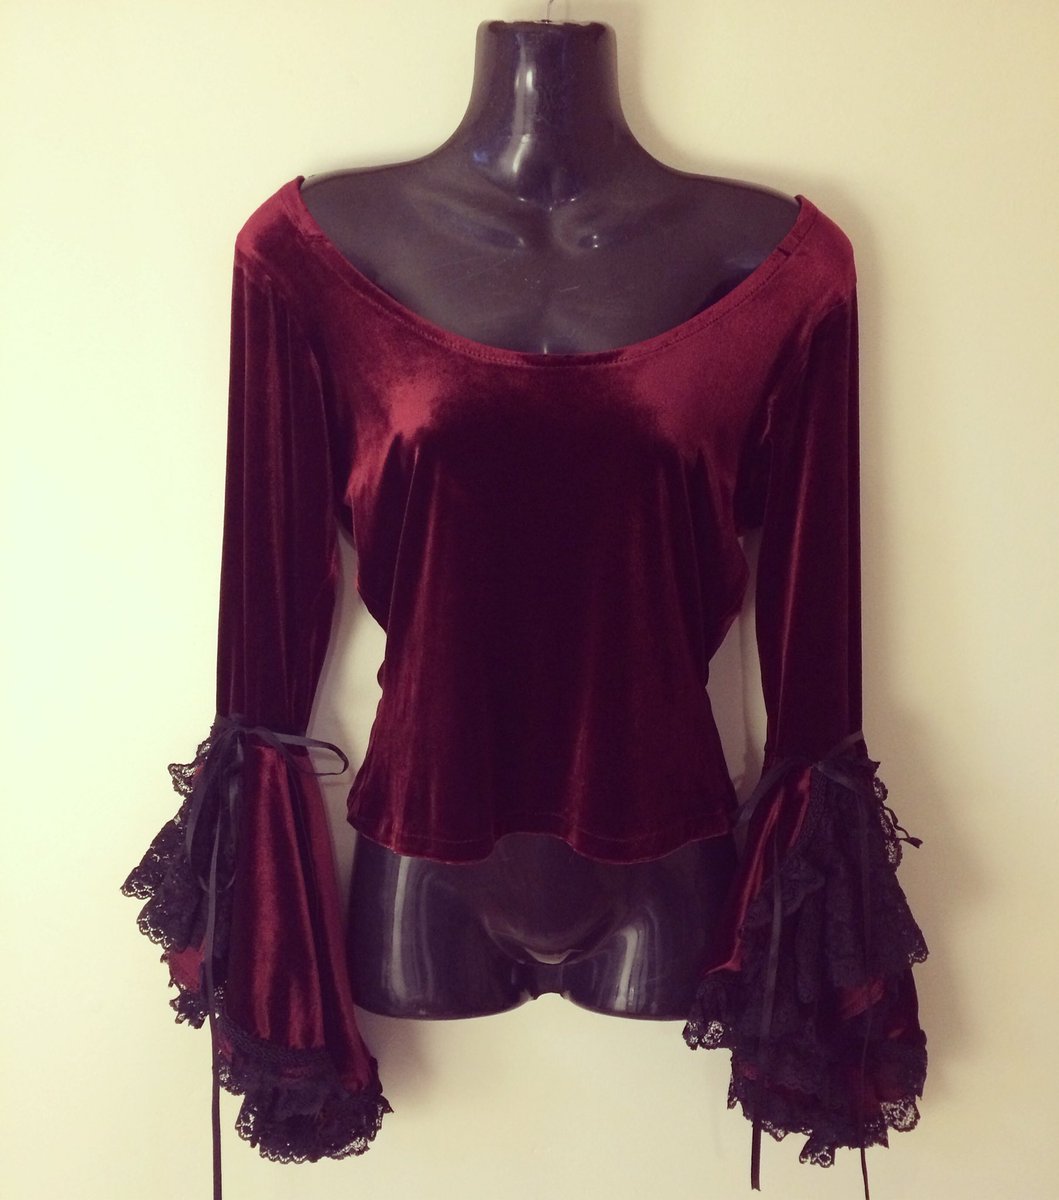 Lovely velour scoop neck with lace bell sleeves.Stunning for a Holiday outfit! Medium. #vintagestore #vintageshop #vintageinspired #medievalinspired #bellsleeves #bellsleevetop #velour #velourtop #holidayoutfit #prettytop #fashion #scoopneck #lacesleeves #kwawesome #wrawesome